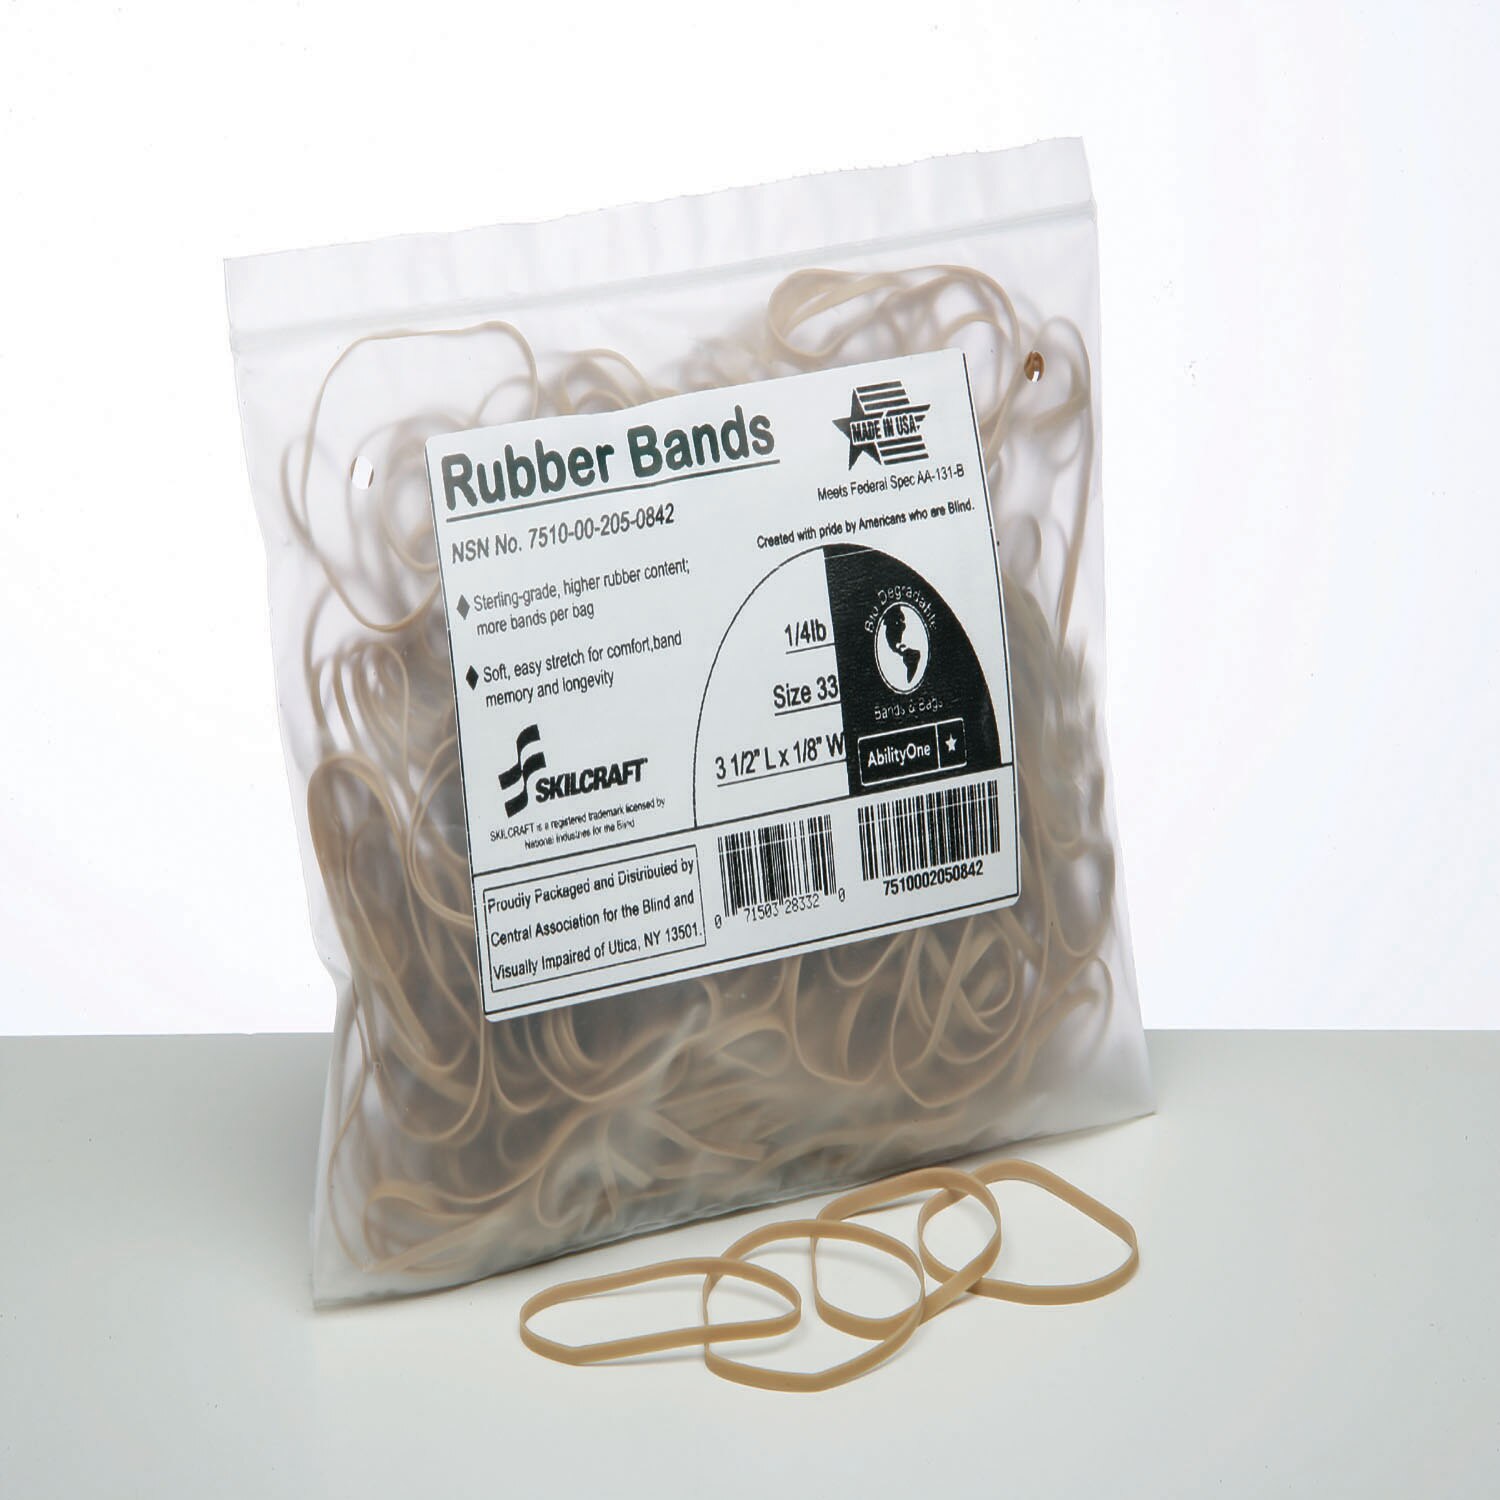 Rubber Band, Sterling Grade, Size 33, 1/4 lb